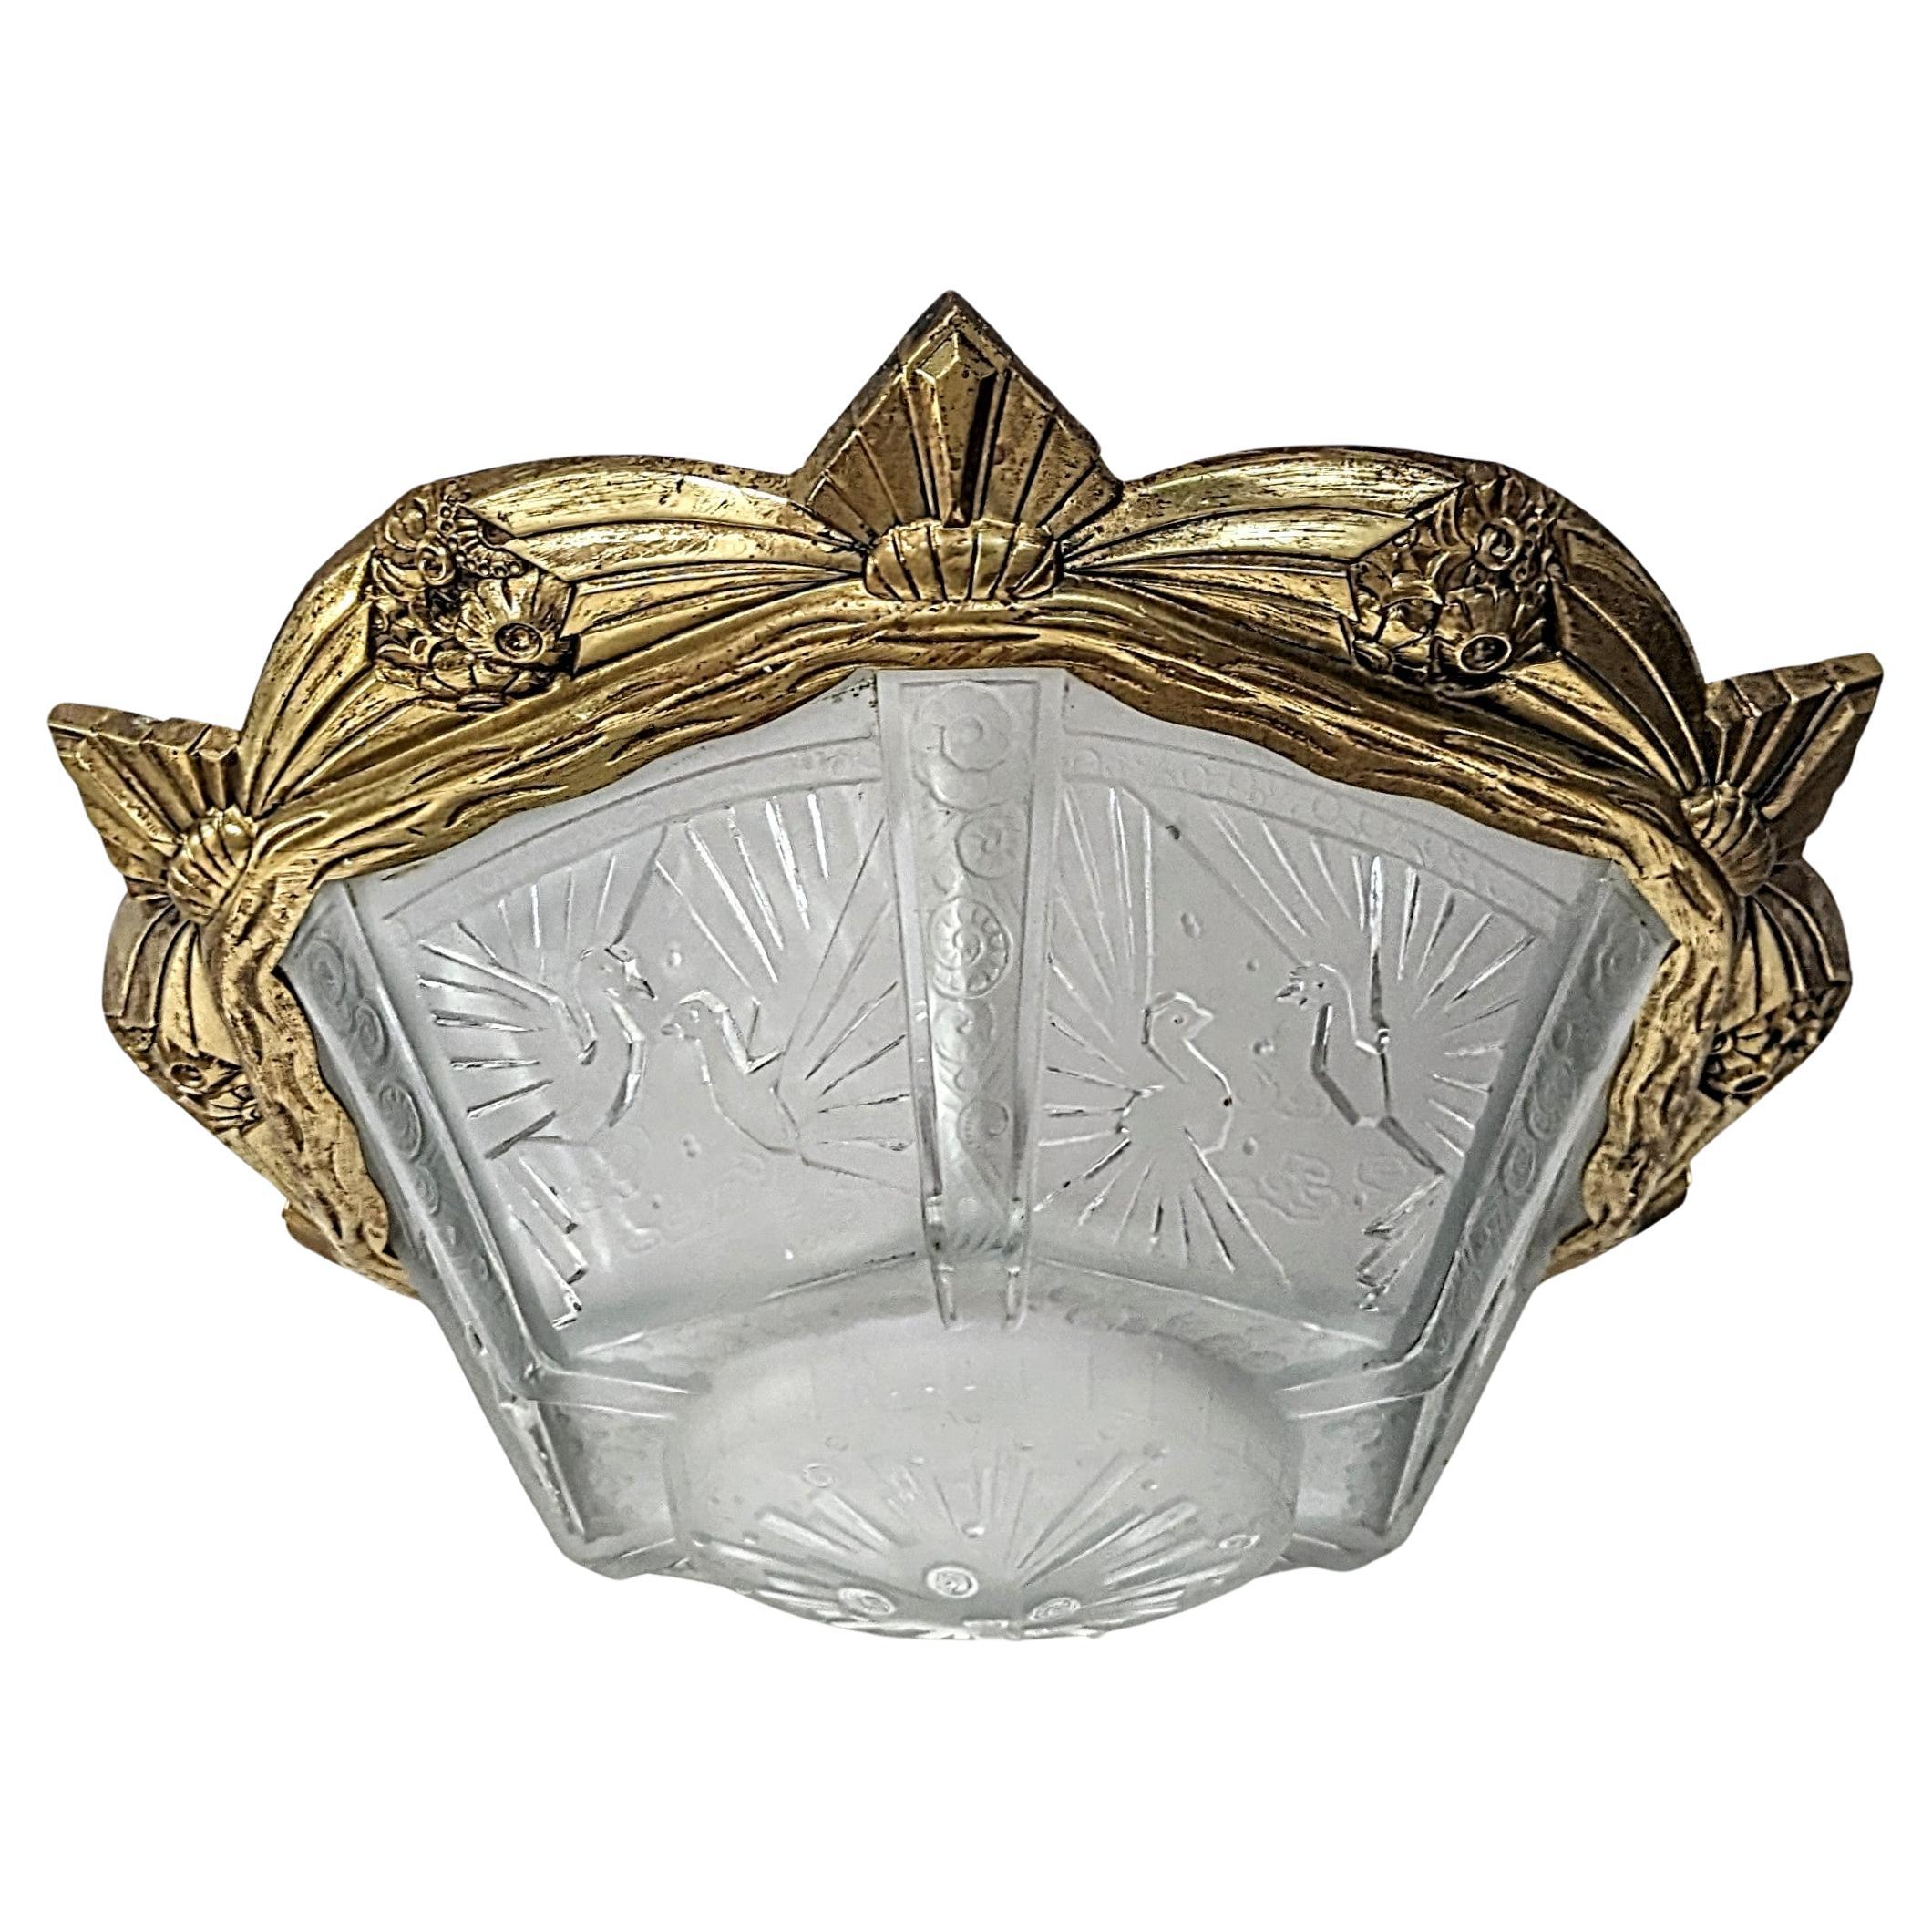 A stunning French Art Deco flush mount was created by the French artist 